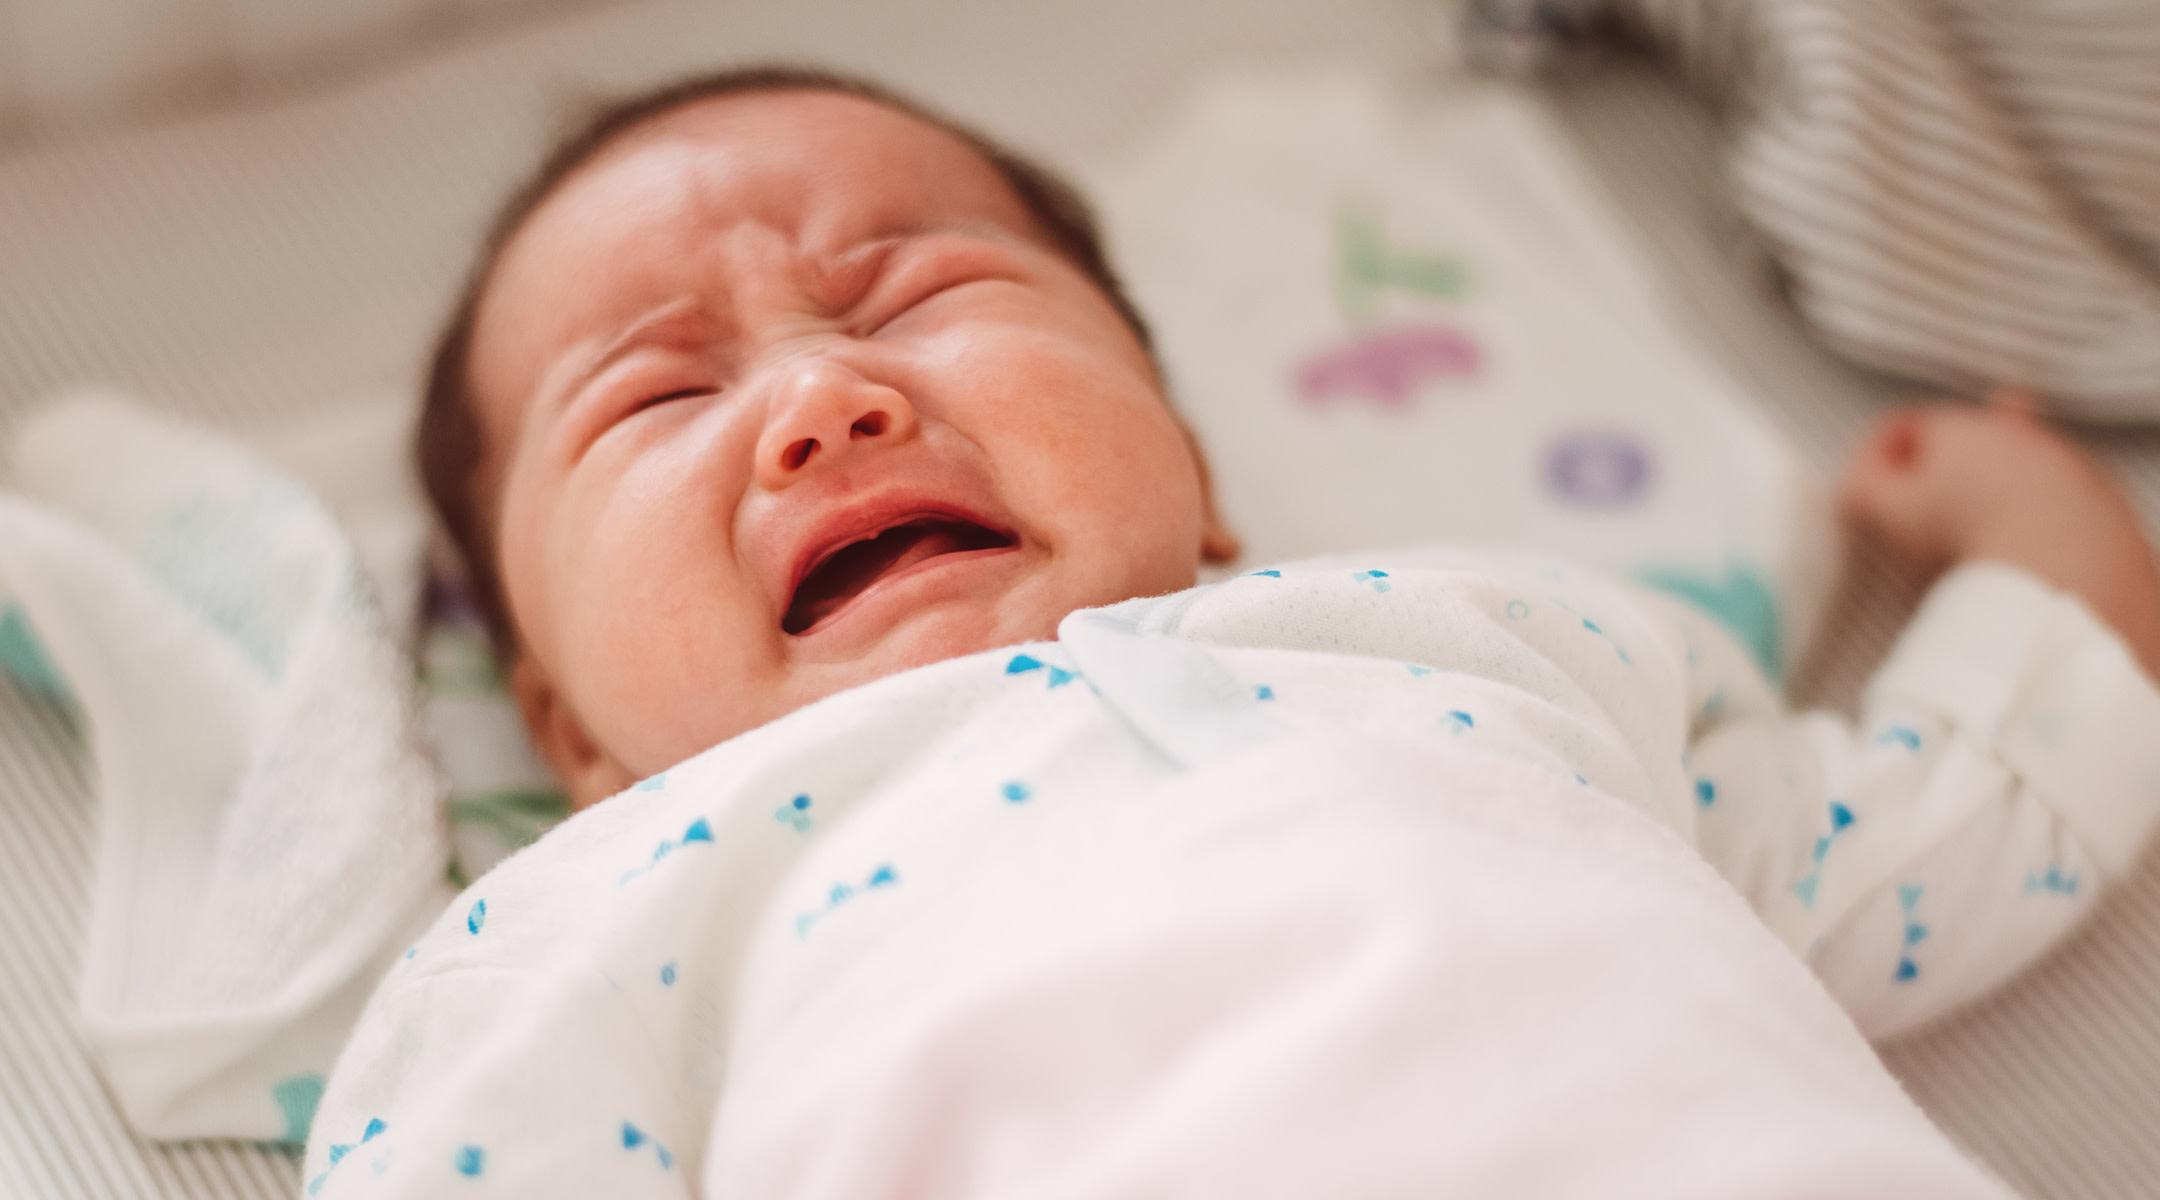 Baby crying; woman pours water on 9-month-old as payback for waking her up. 